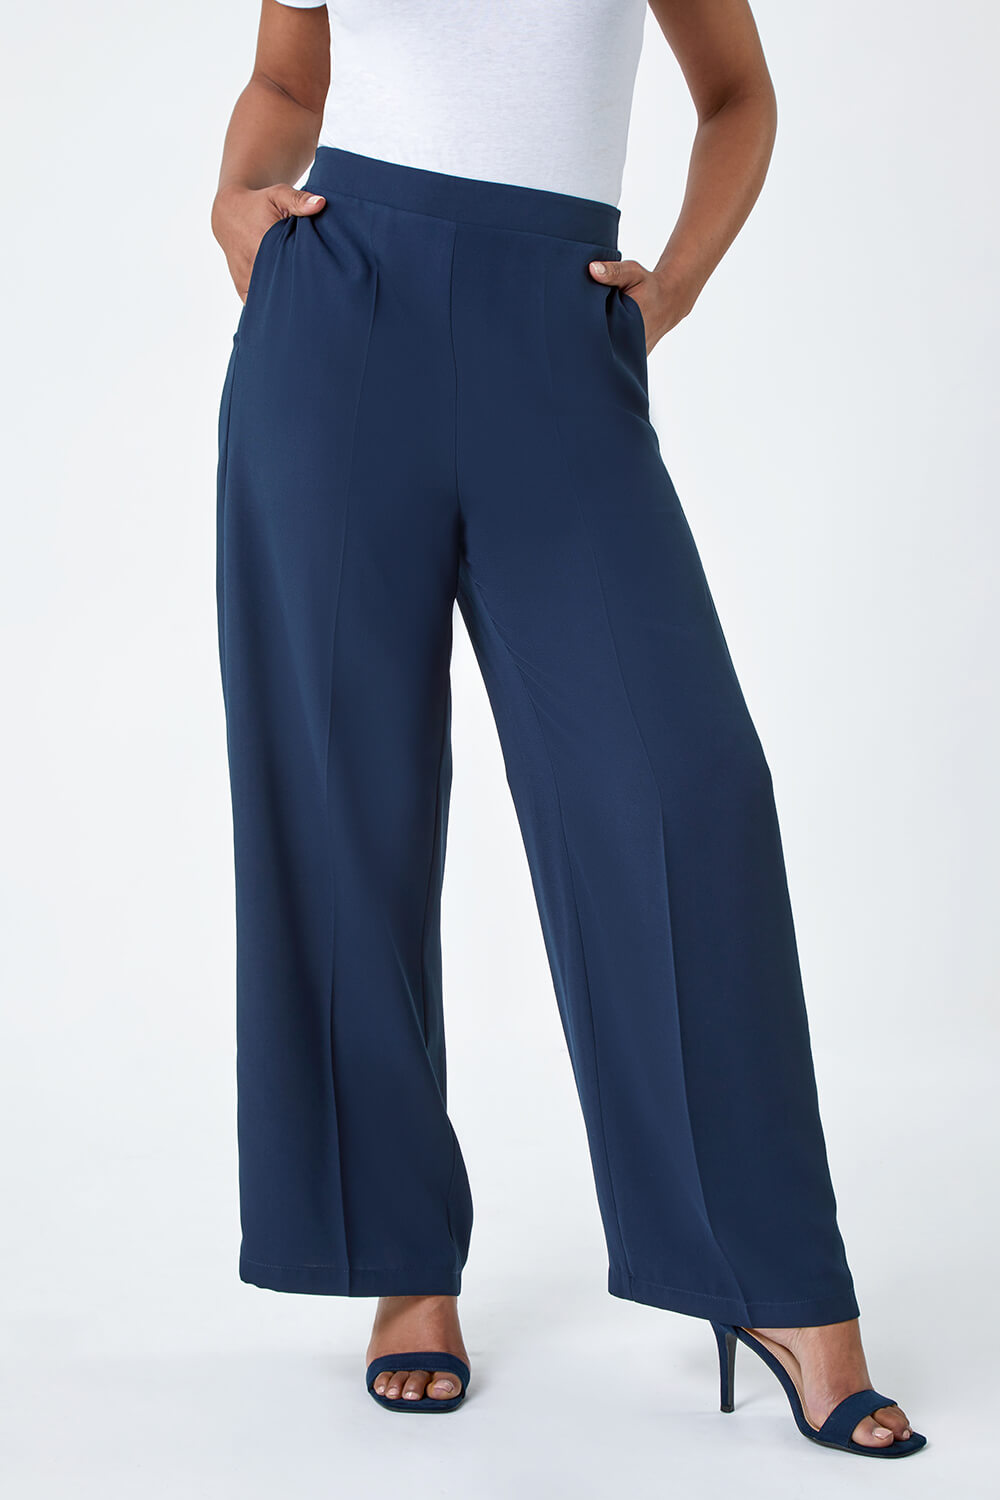 Navy  Petite Pocket Wide Leg Trousers, Image 2 of 5